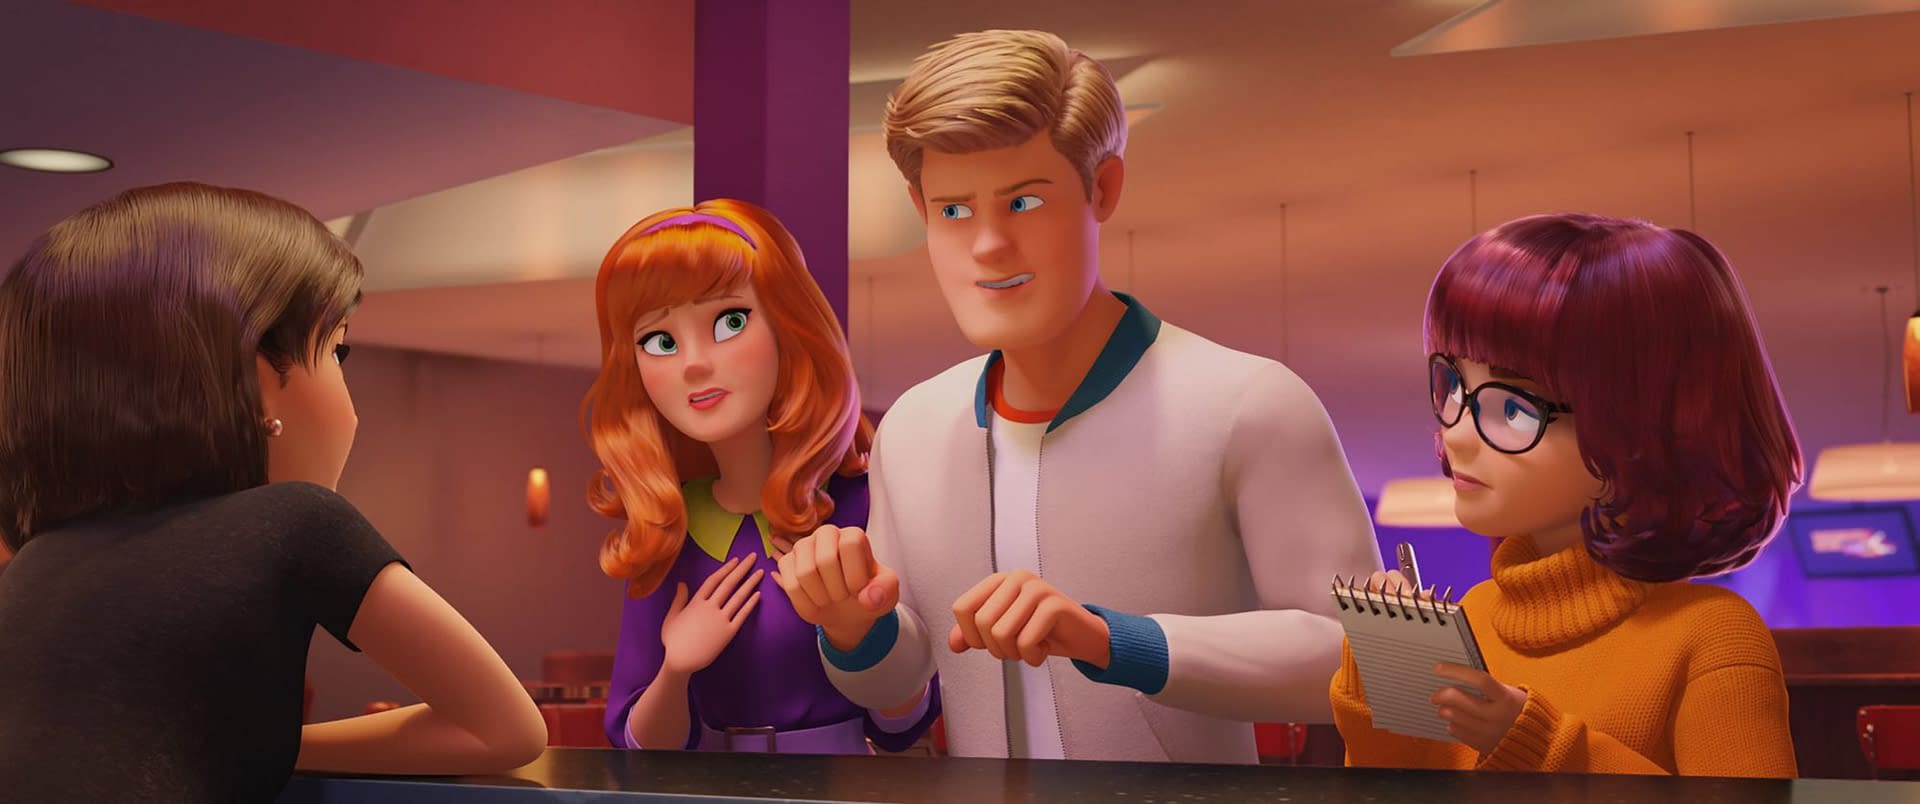 "Scoob": 4 New Images from the New Scooby-Doo Movie